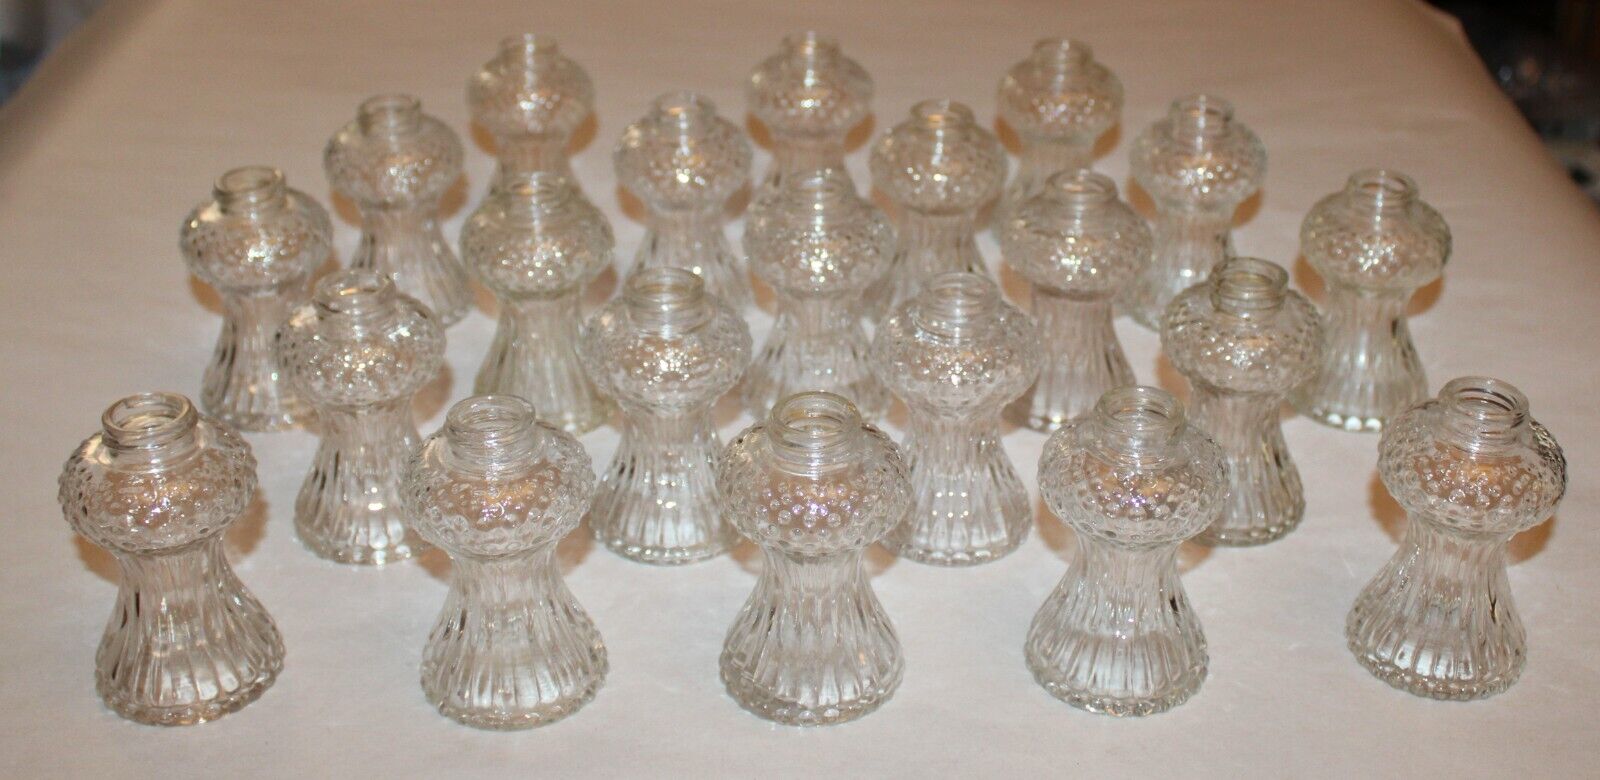 L.E. Smith Co. Hobnail Oil Lamp Font/Bottle Blown/Pressed Clear Glass Lot of 21